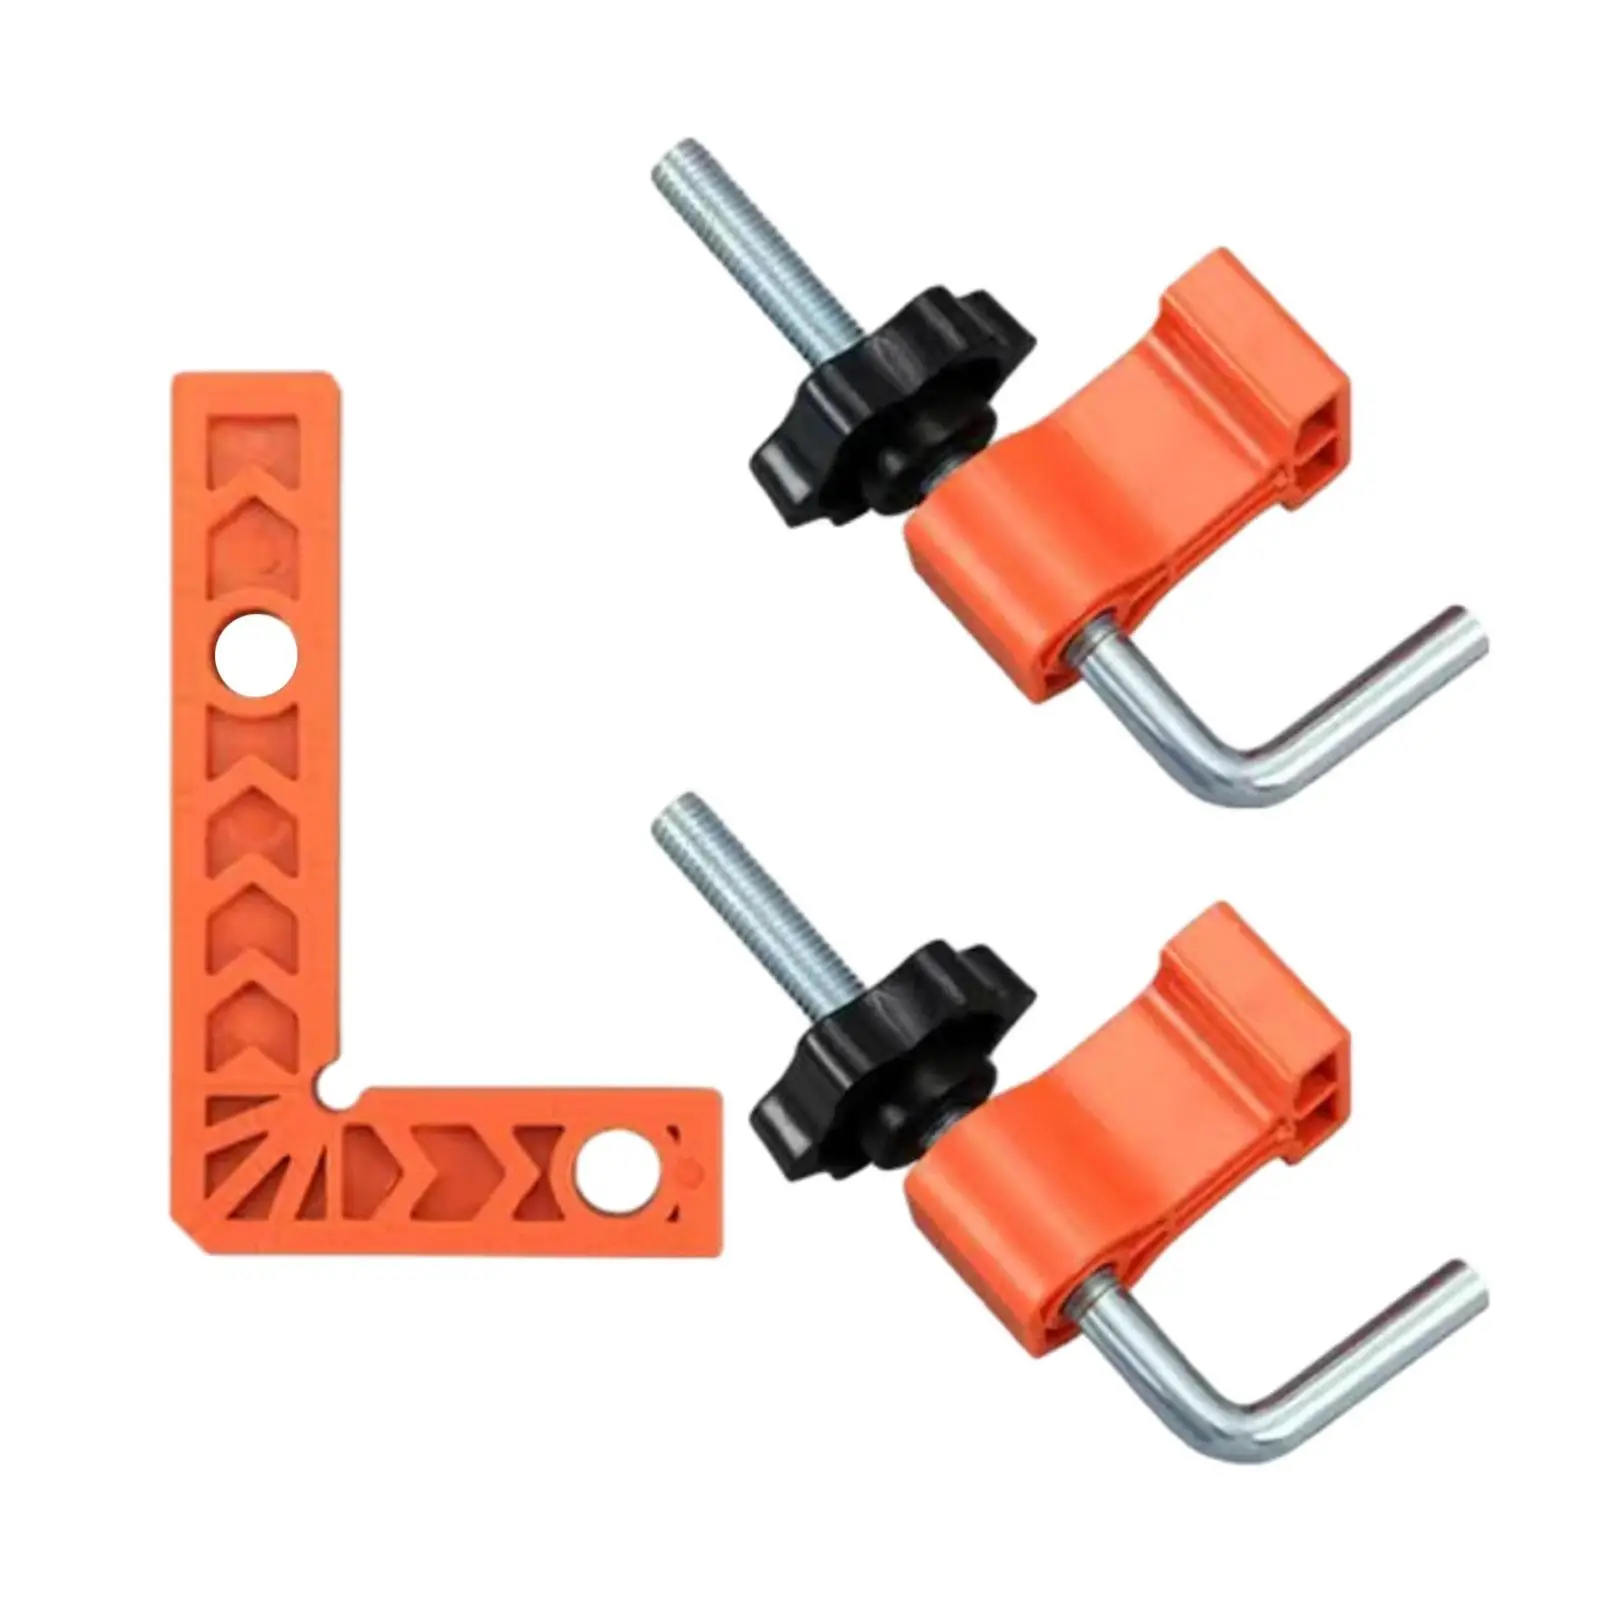 90 Degree Corner Clamp Carpentry Squares Professional L Type Woodworking Tool Positioning Square for Cabinets, Picture Frames